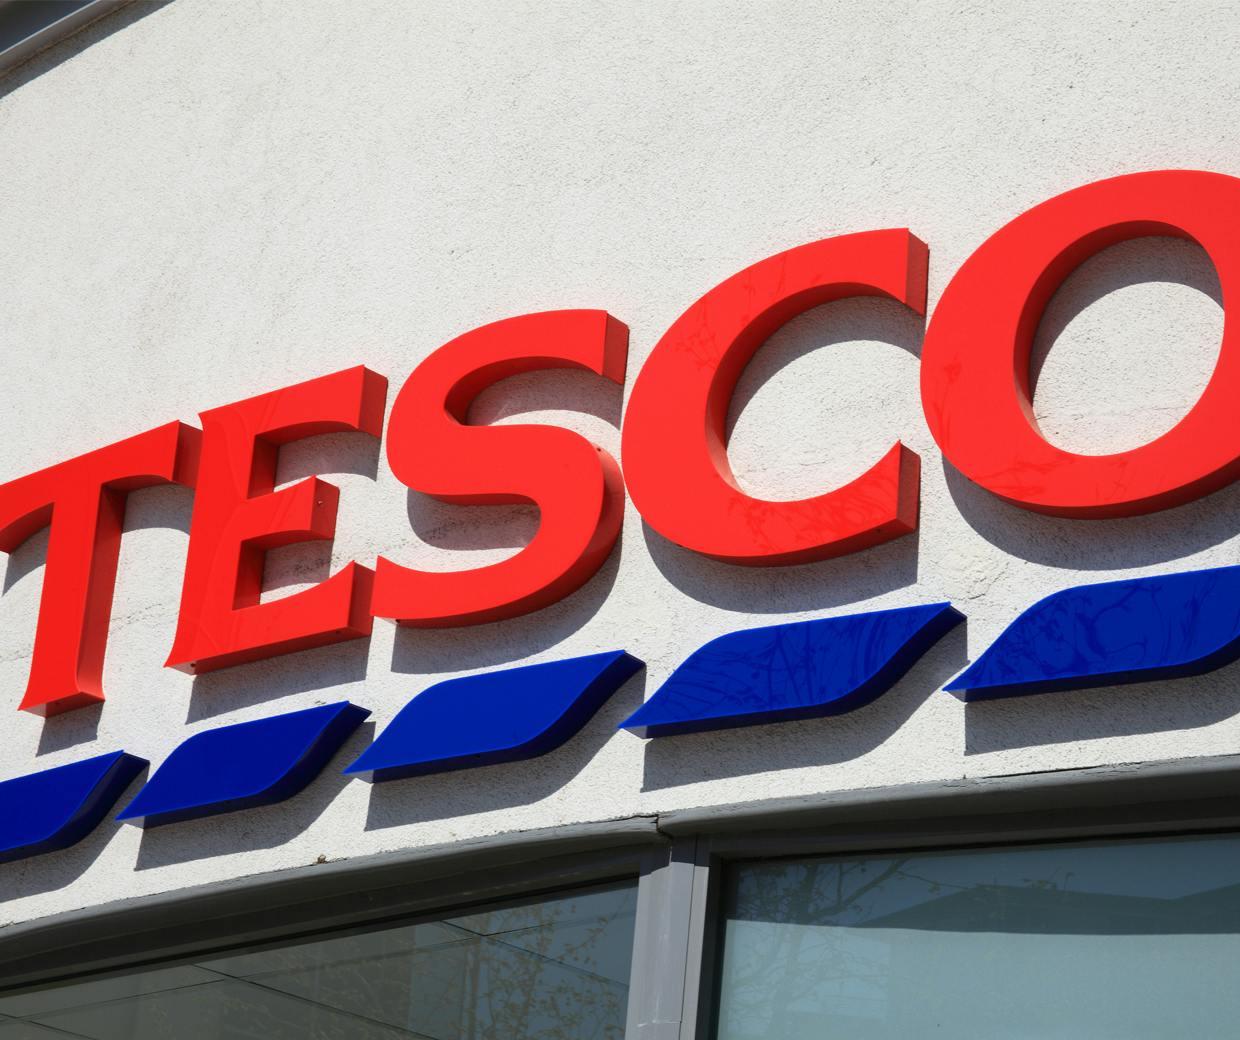 Tesco 'frustrated' at media spend being 'siphoned off' to protect